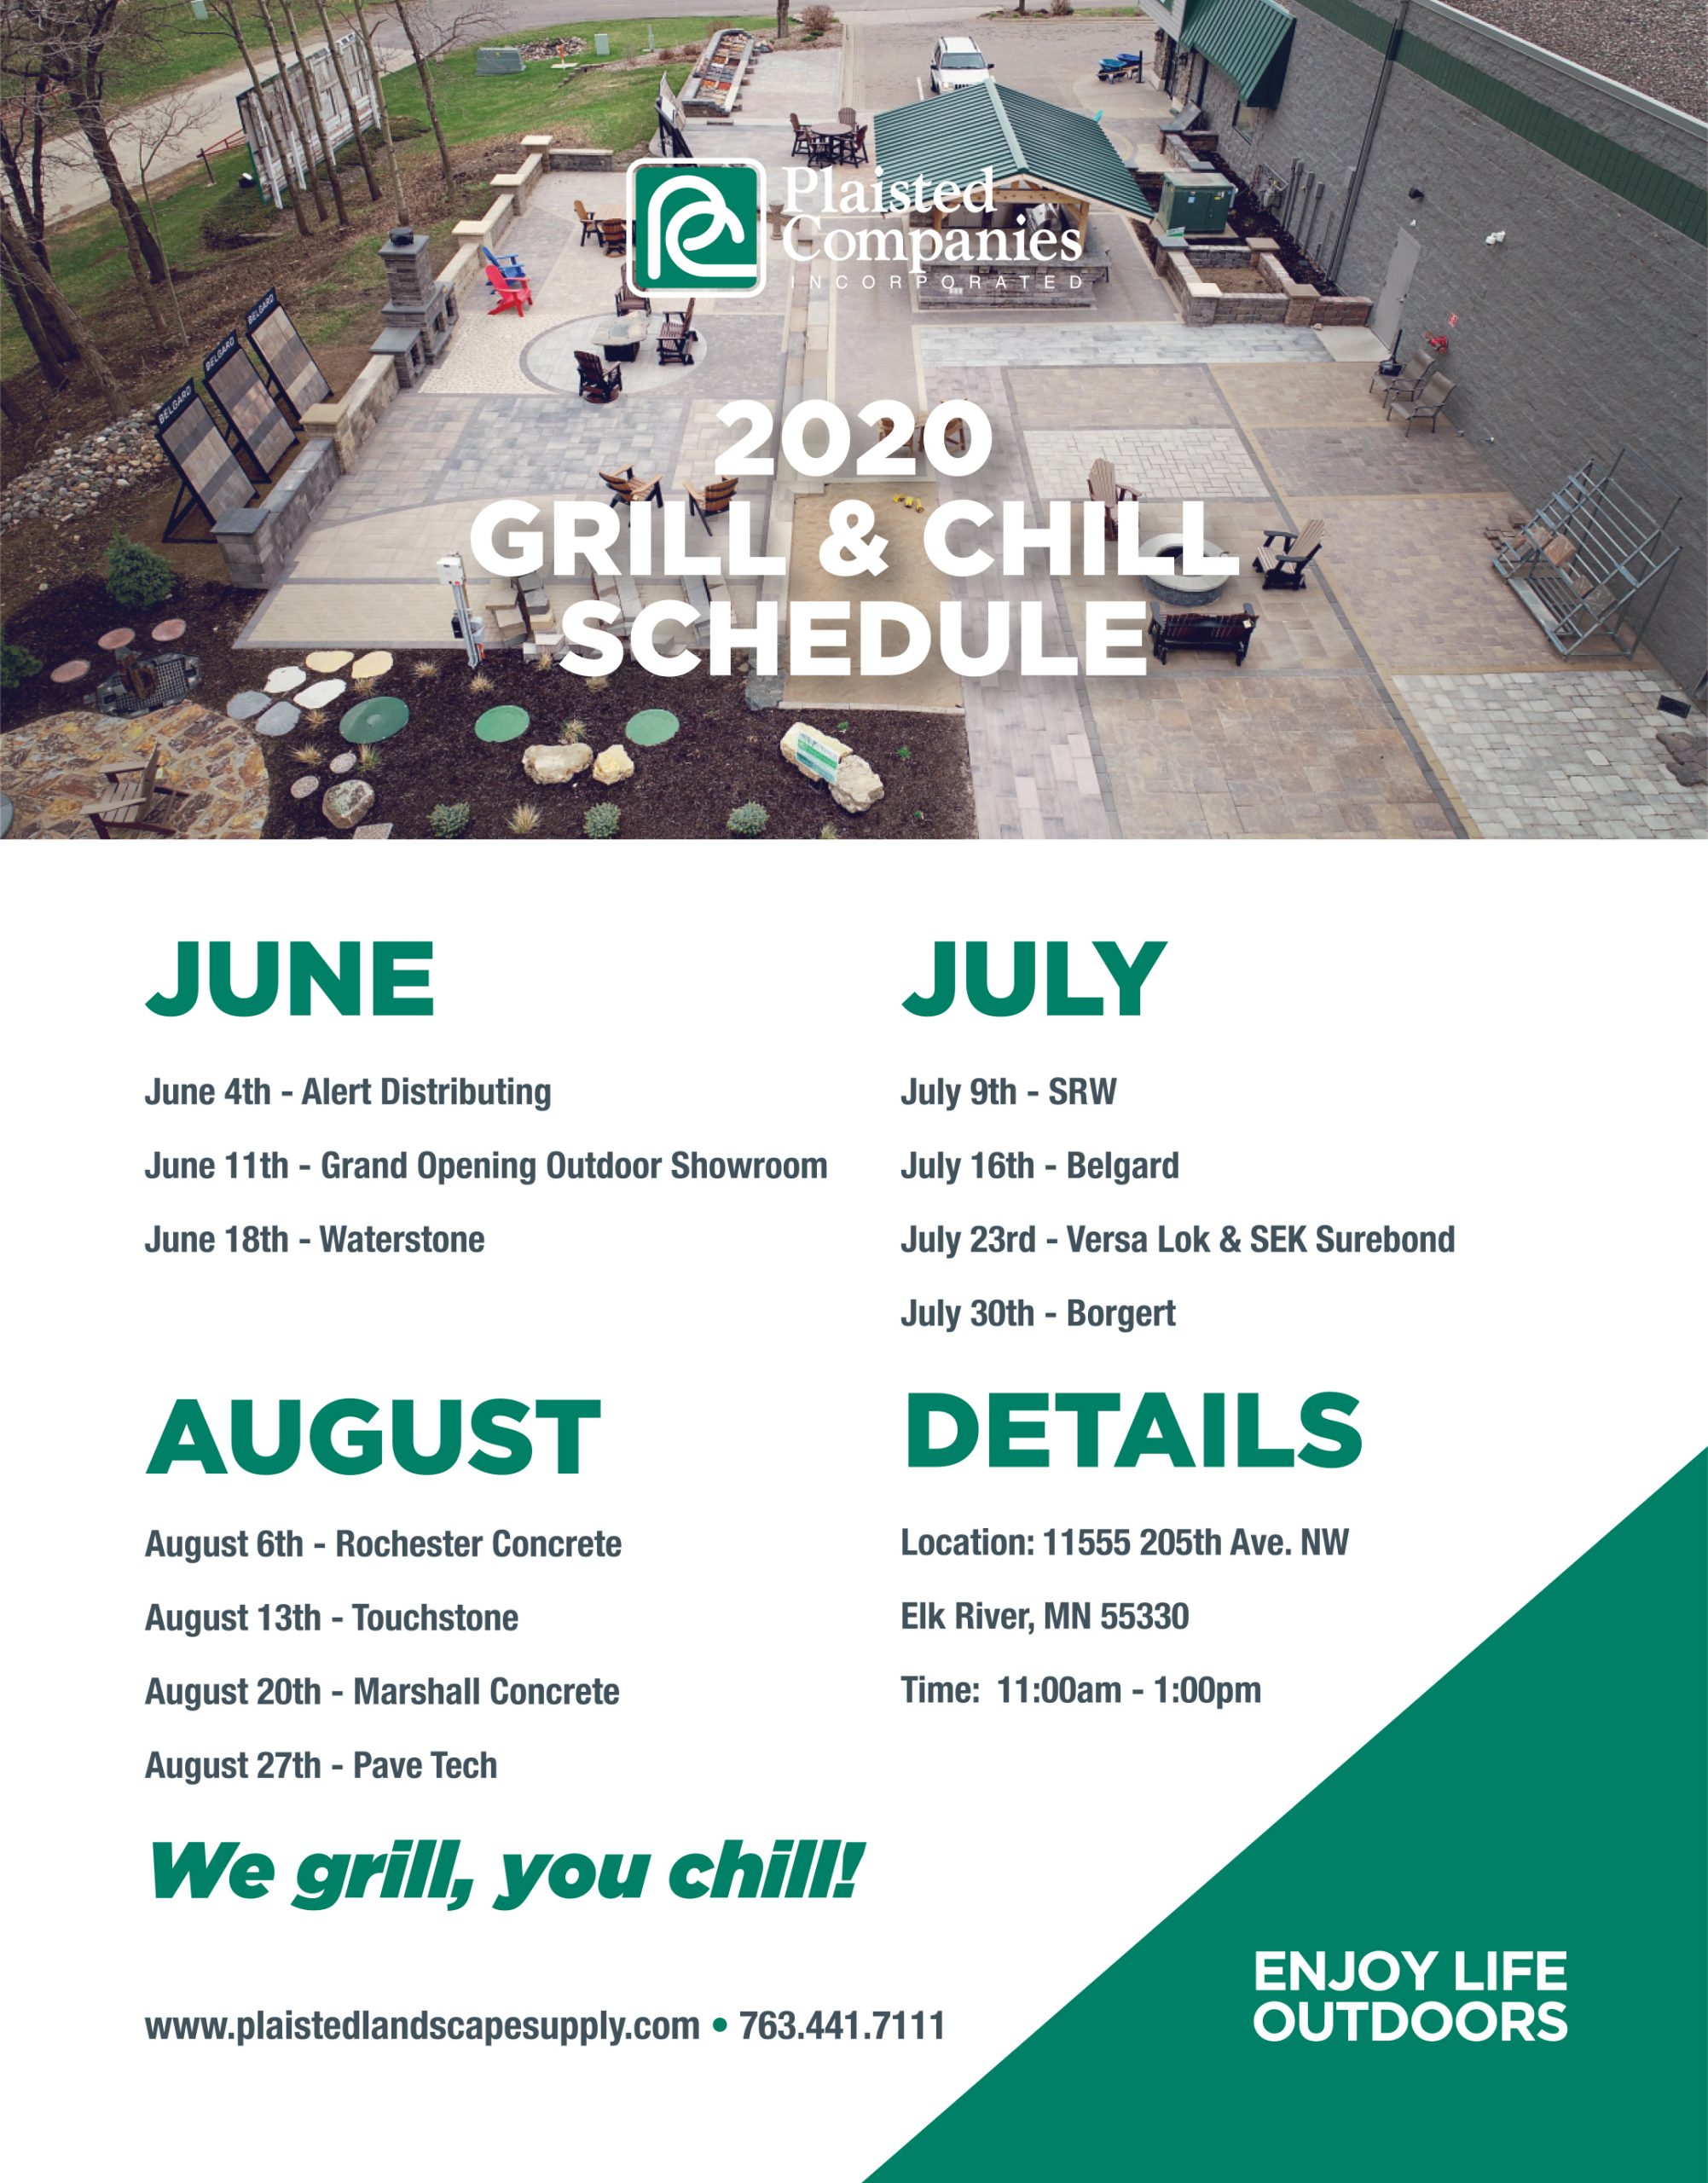 Grill & Chill at Plaisted Companies